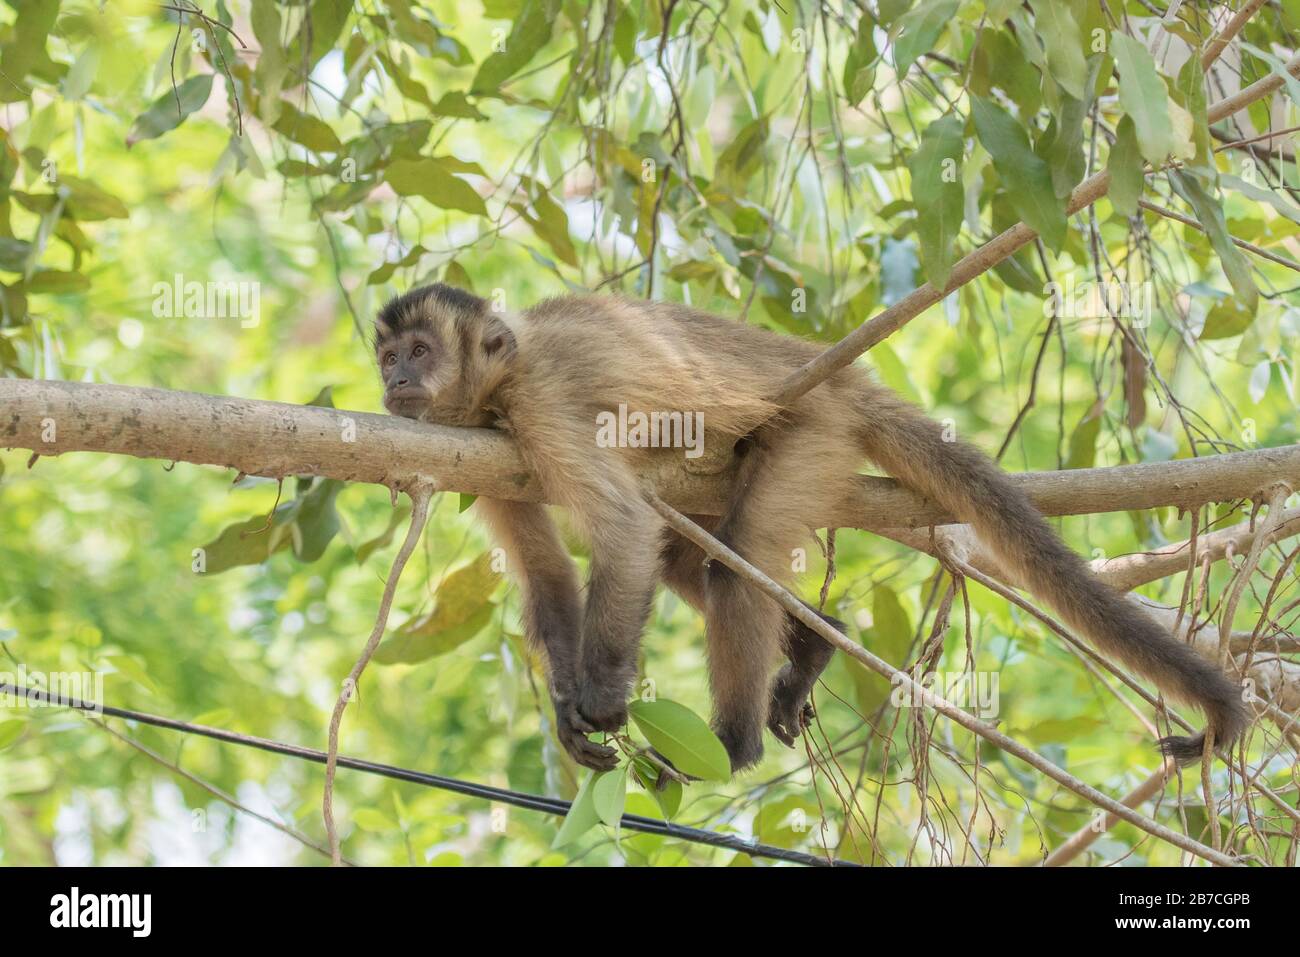 Brown Capuchin Monkey, Cebus apella, relaxing on a tree branch in the Pantanal, Mato Grosso, Brazil Stock Photo